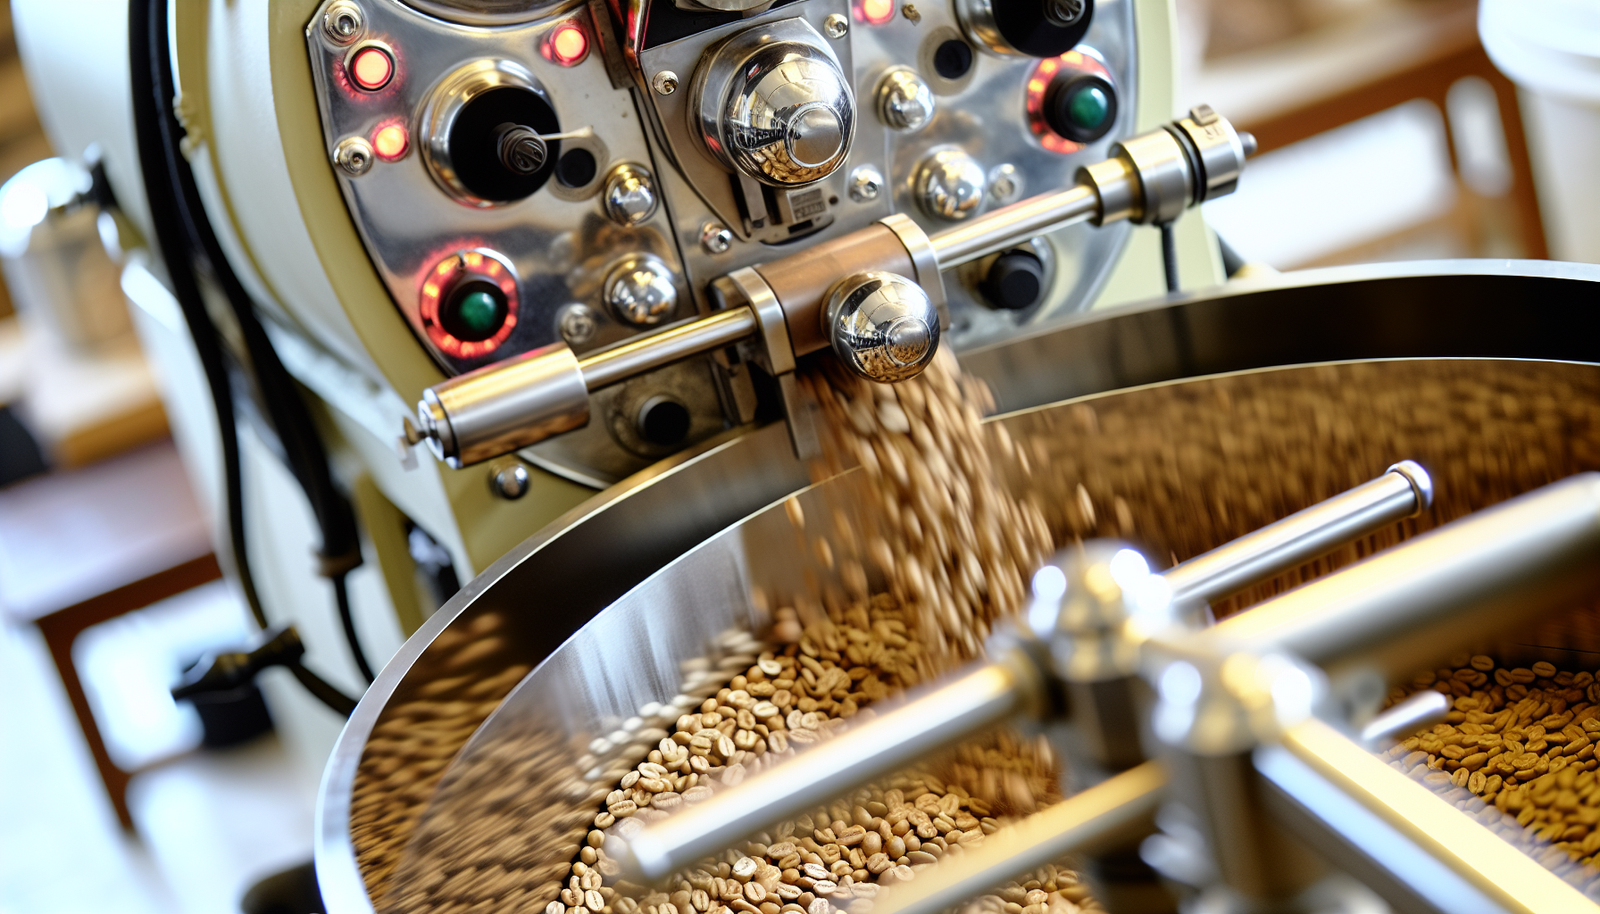 A close-up of a coffee roasting machine in action